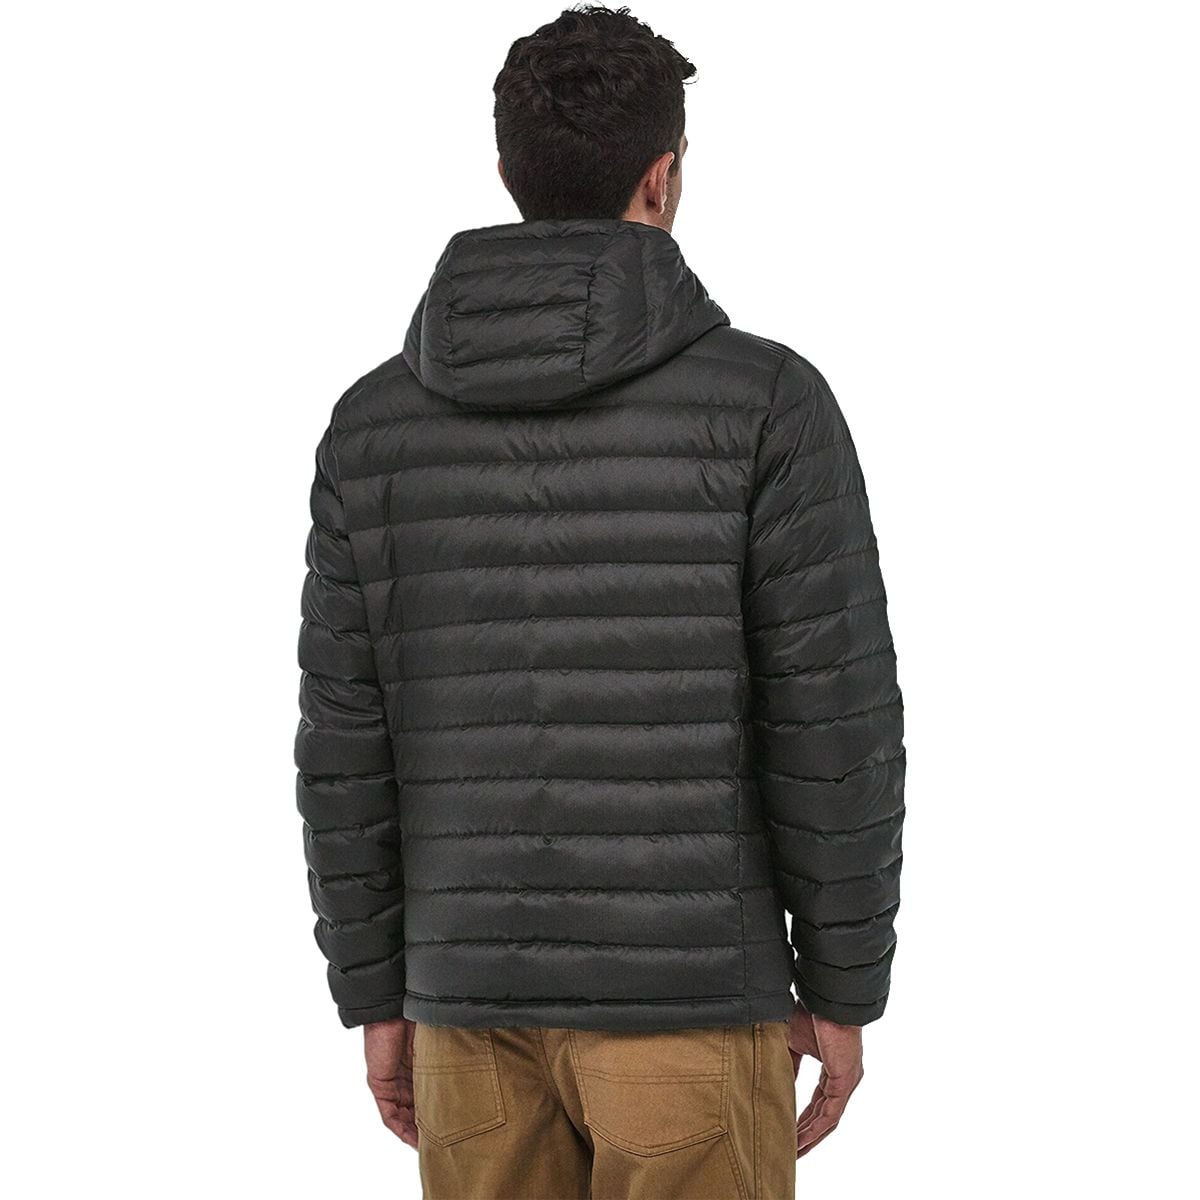 Patagonia Down Sweater Hooded Jacket - Men's | Backcountry.com